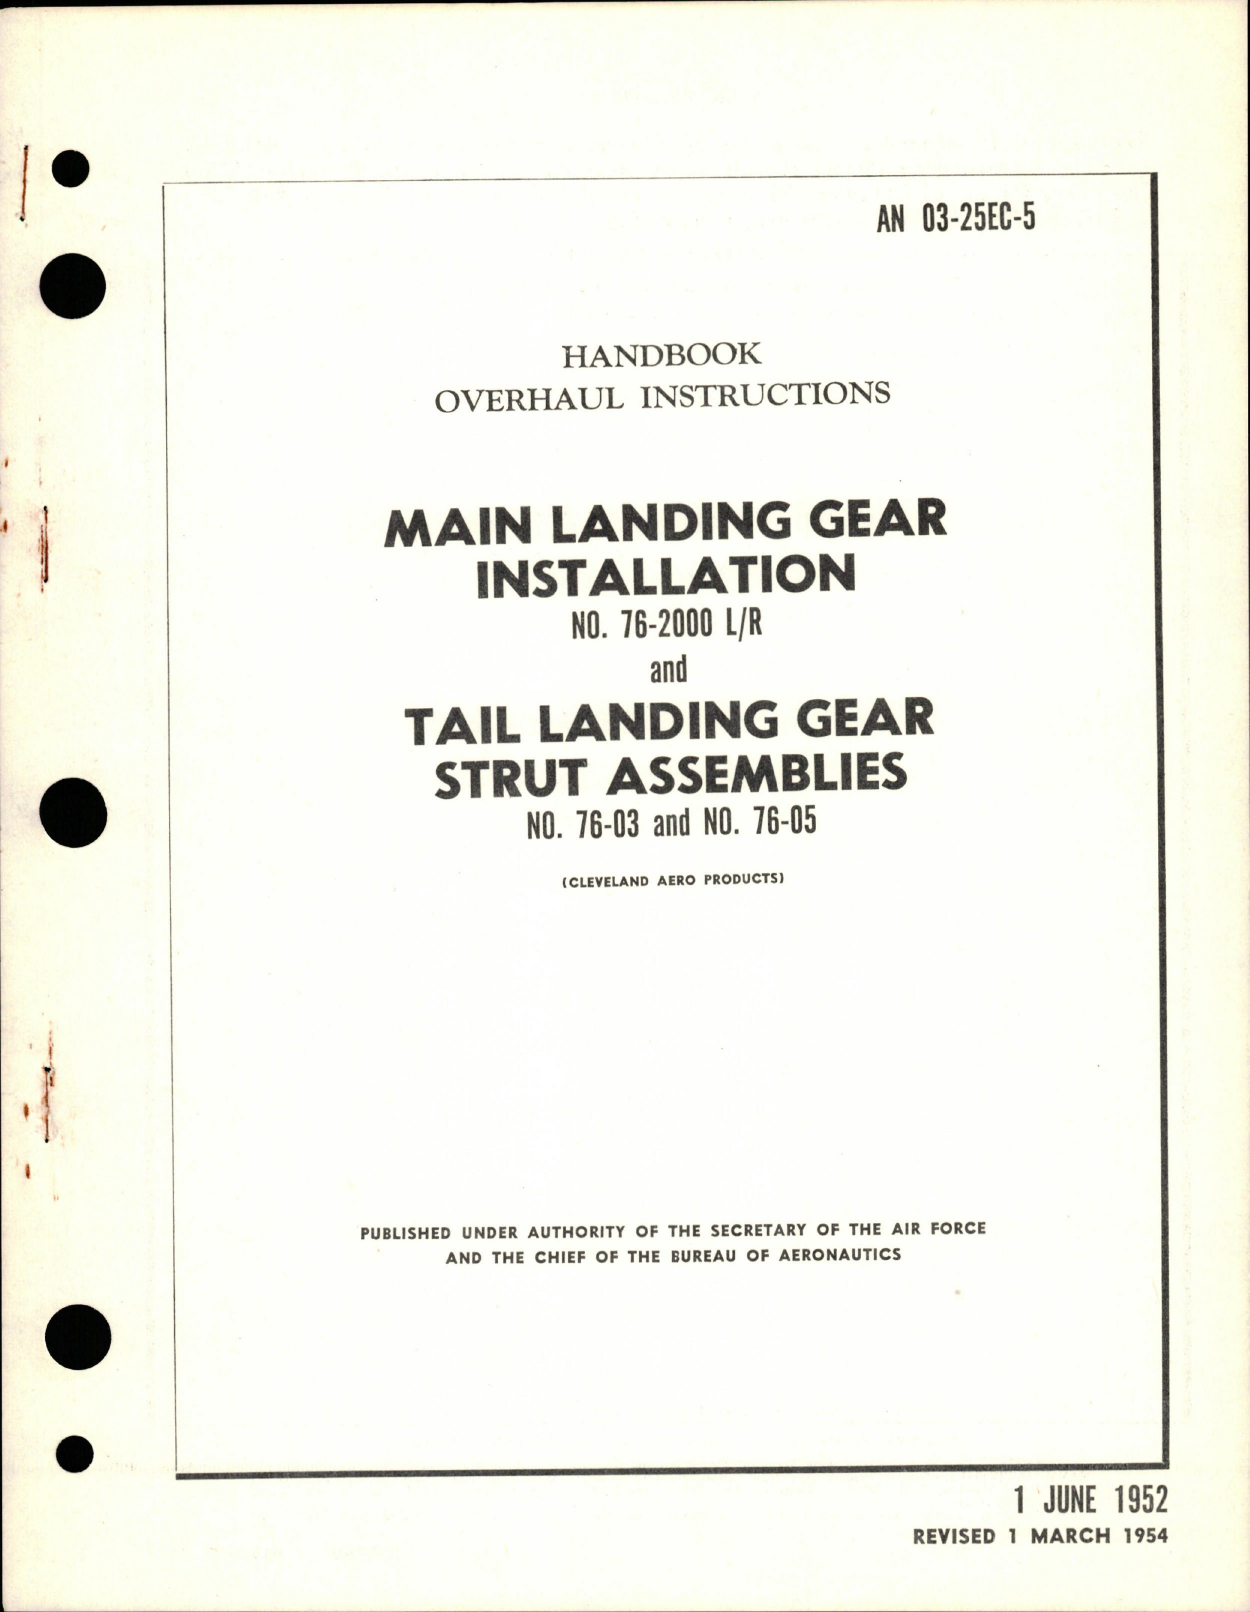 Sample page 1 from AirCorps Library document: Overhaul Instructions for Main Landing Gear Installation and Tail Landing Gear Strut Assembly - 76-2000, 76-03, and 76-05